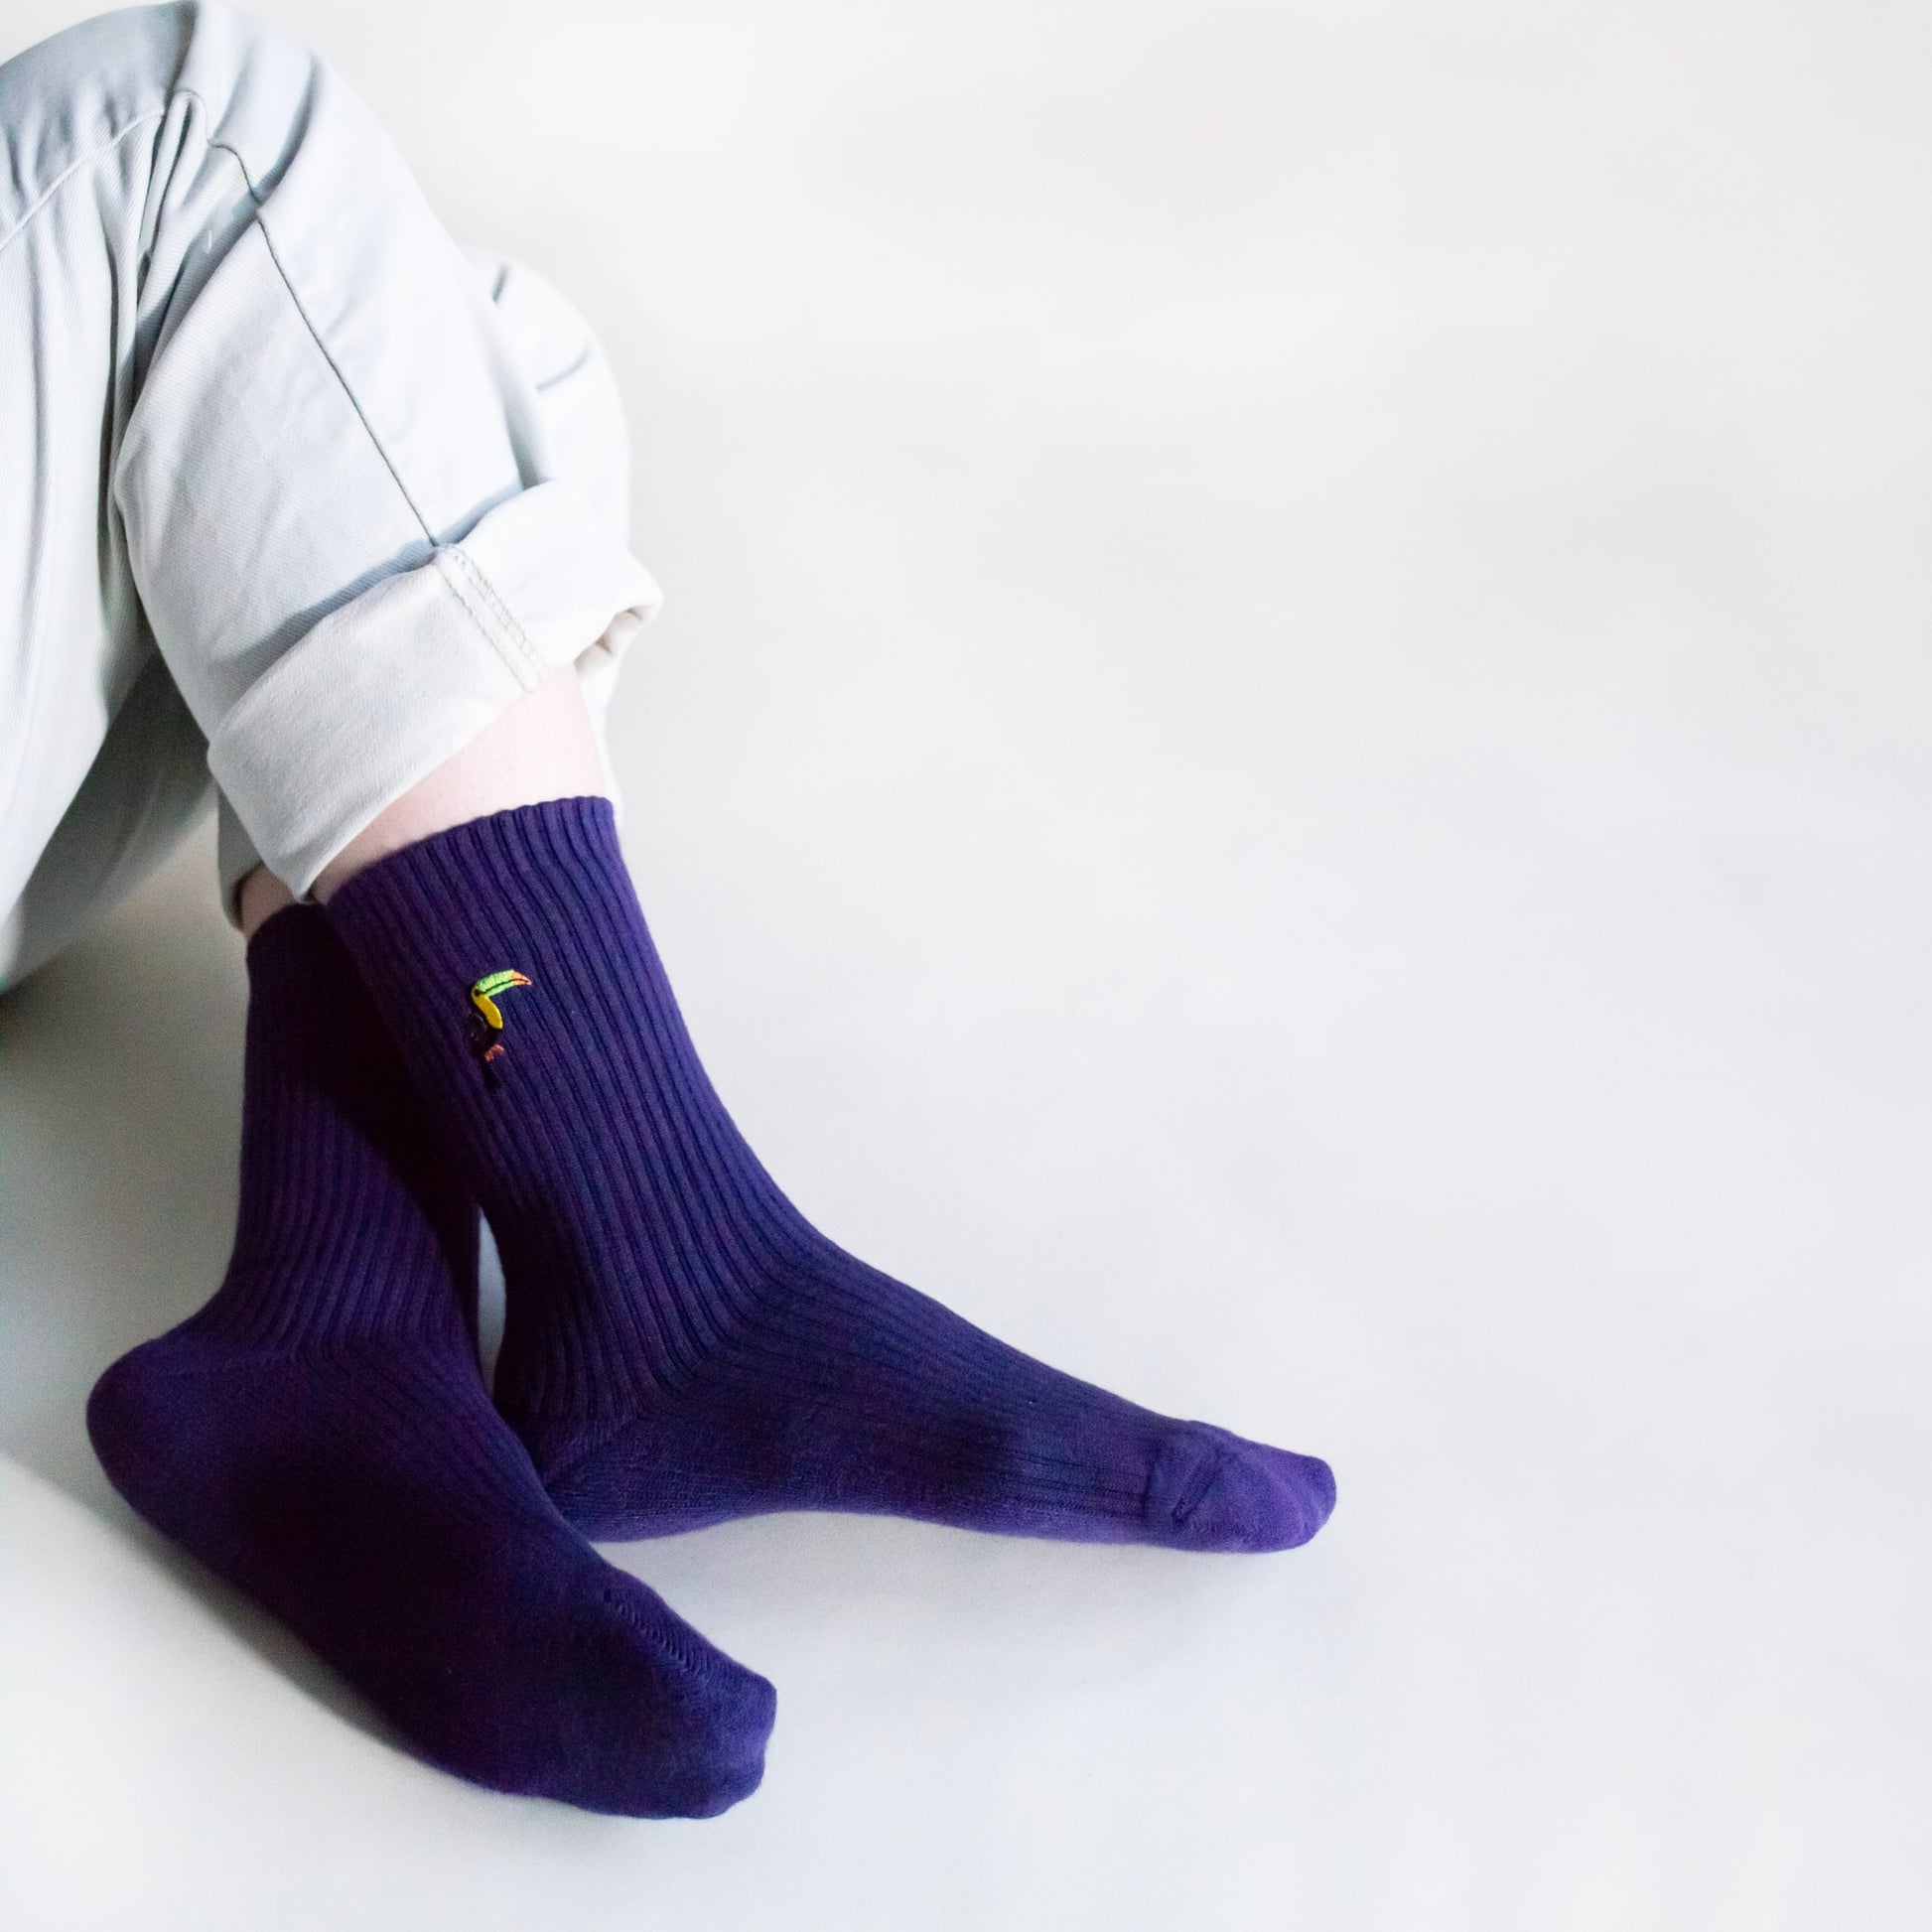  Save the Toucans | Luxury Ribbed Bamboo Socks - worn